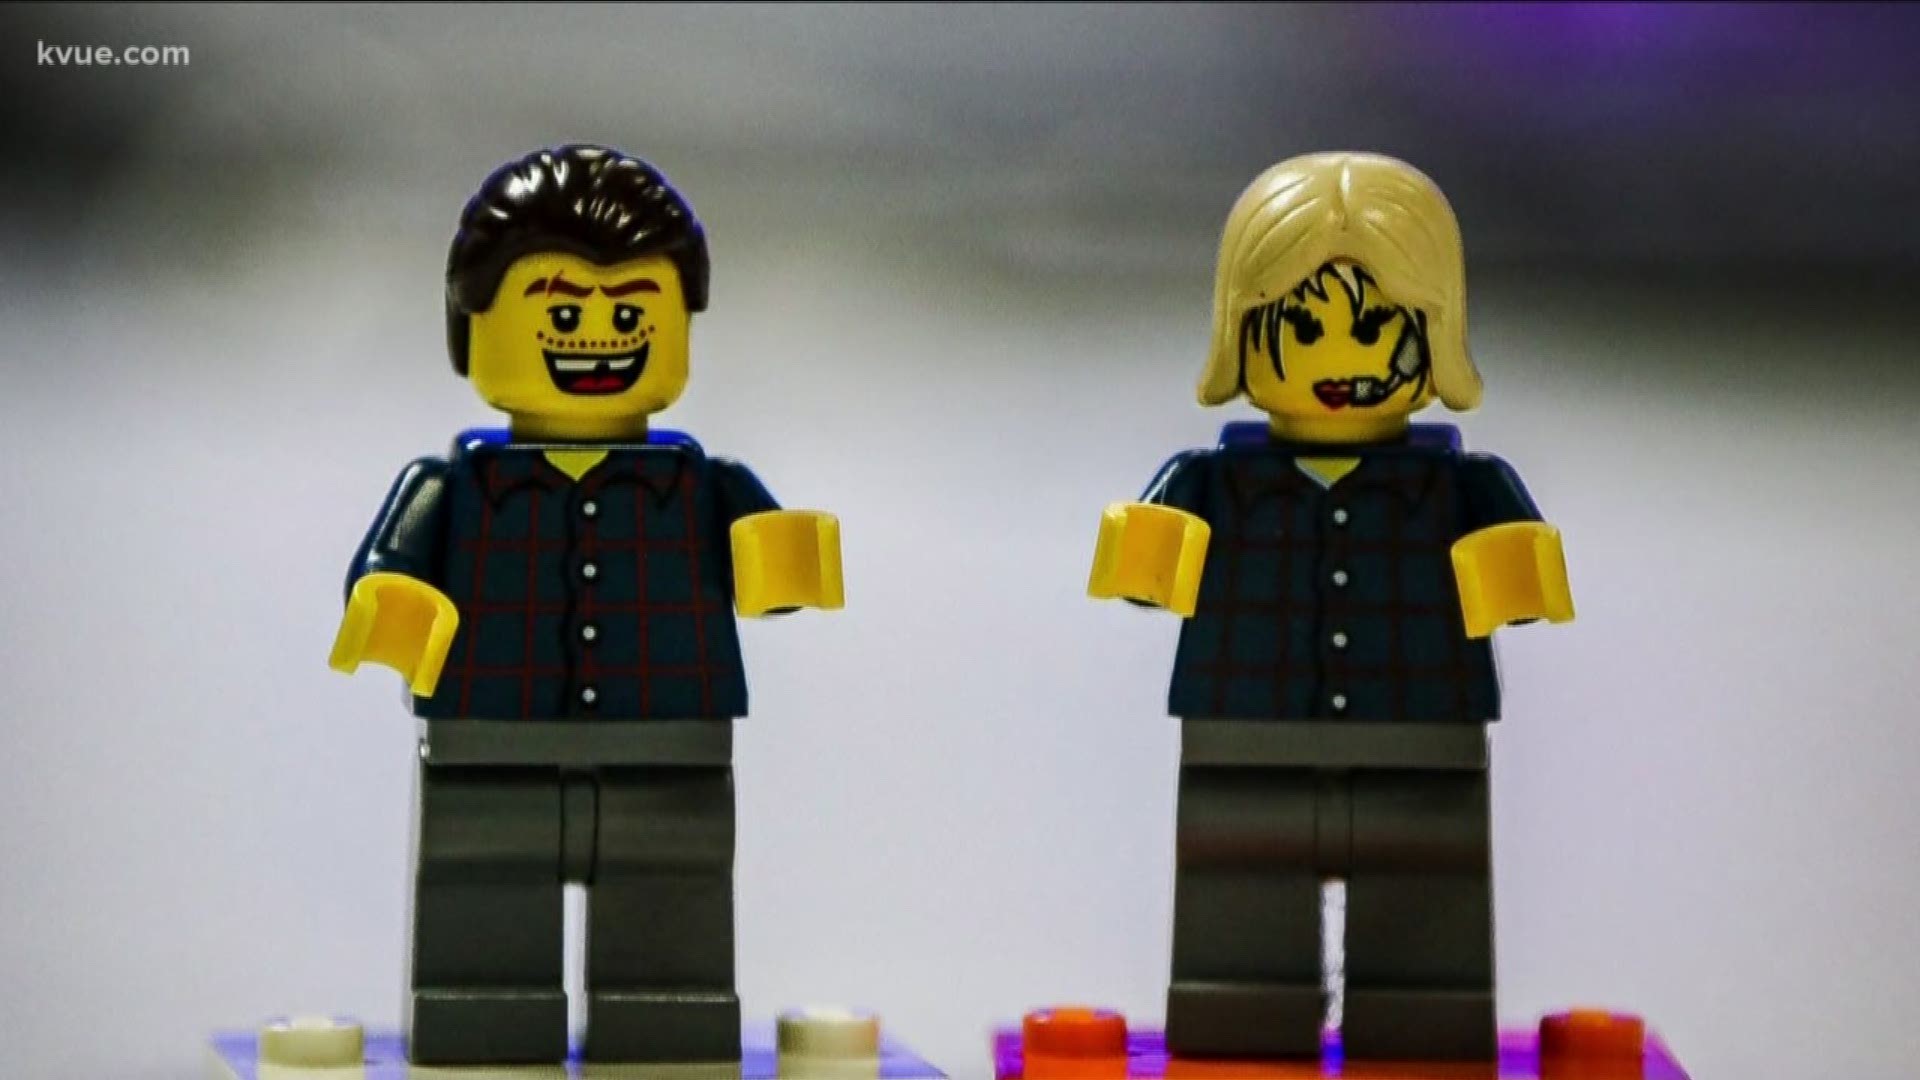 Some adults are using Legos as an outlet to improve mental health.